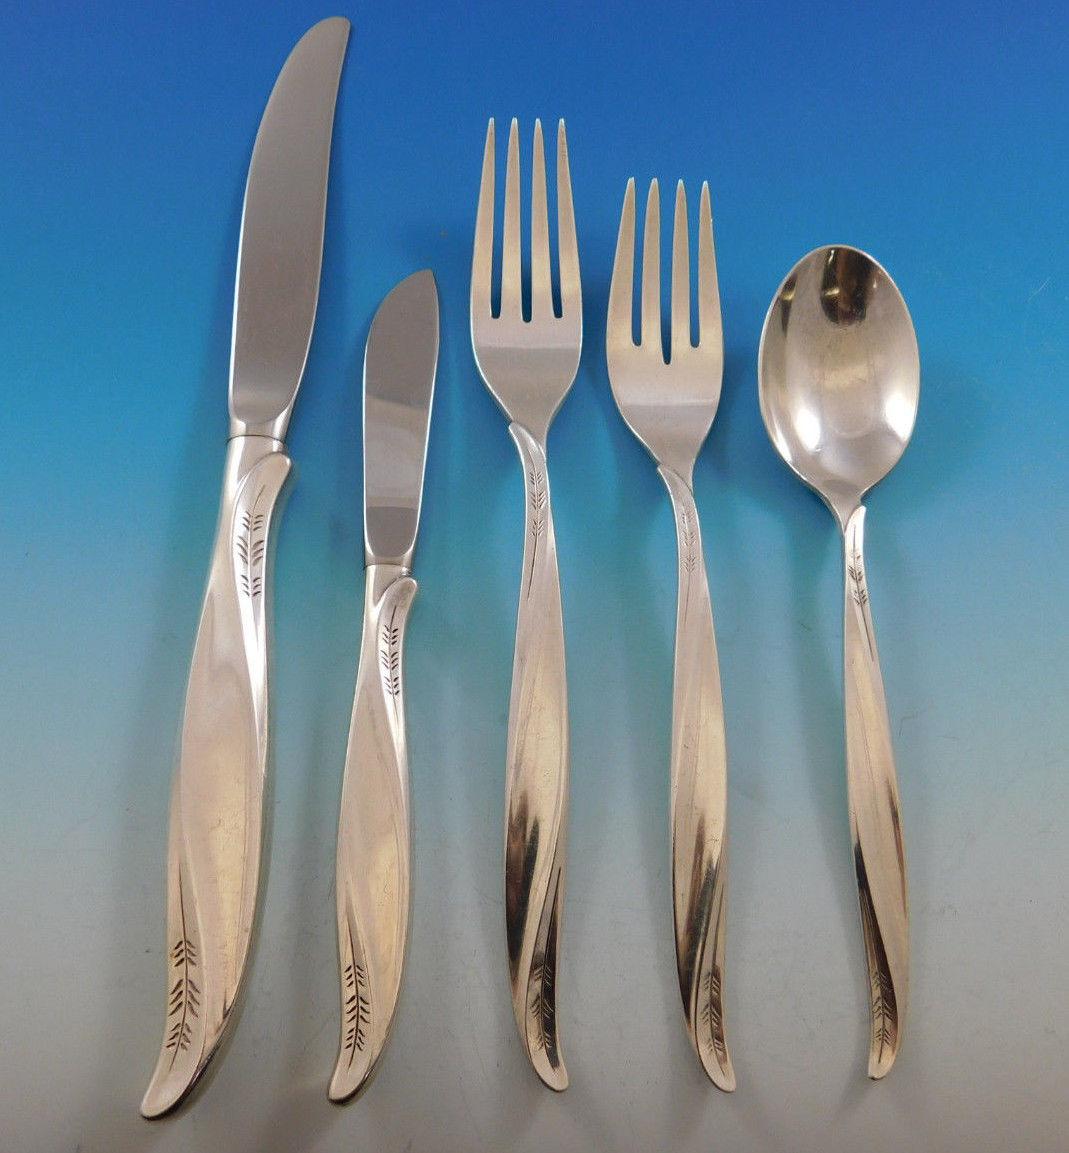 Pine Spray by International sterling silver flatware set of 43 pieces. This set includes: 

Eight knives, 9 1/4